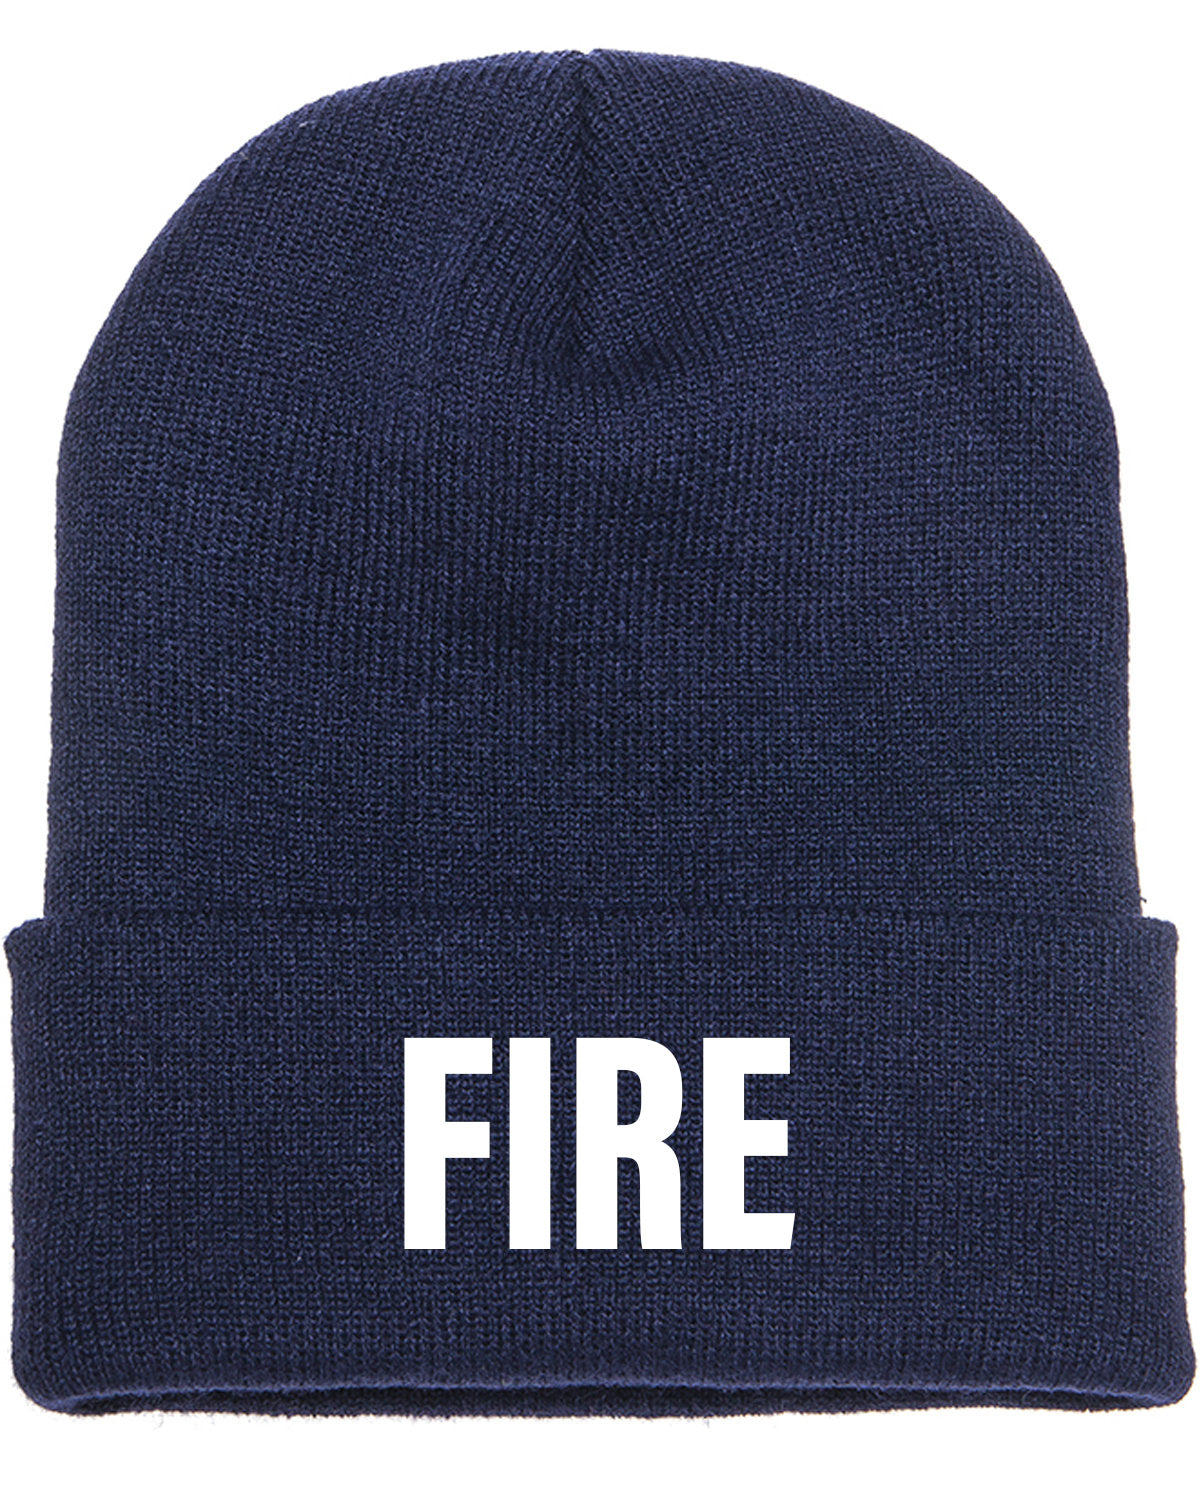 Fire - Beanie Lined Navy